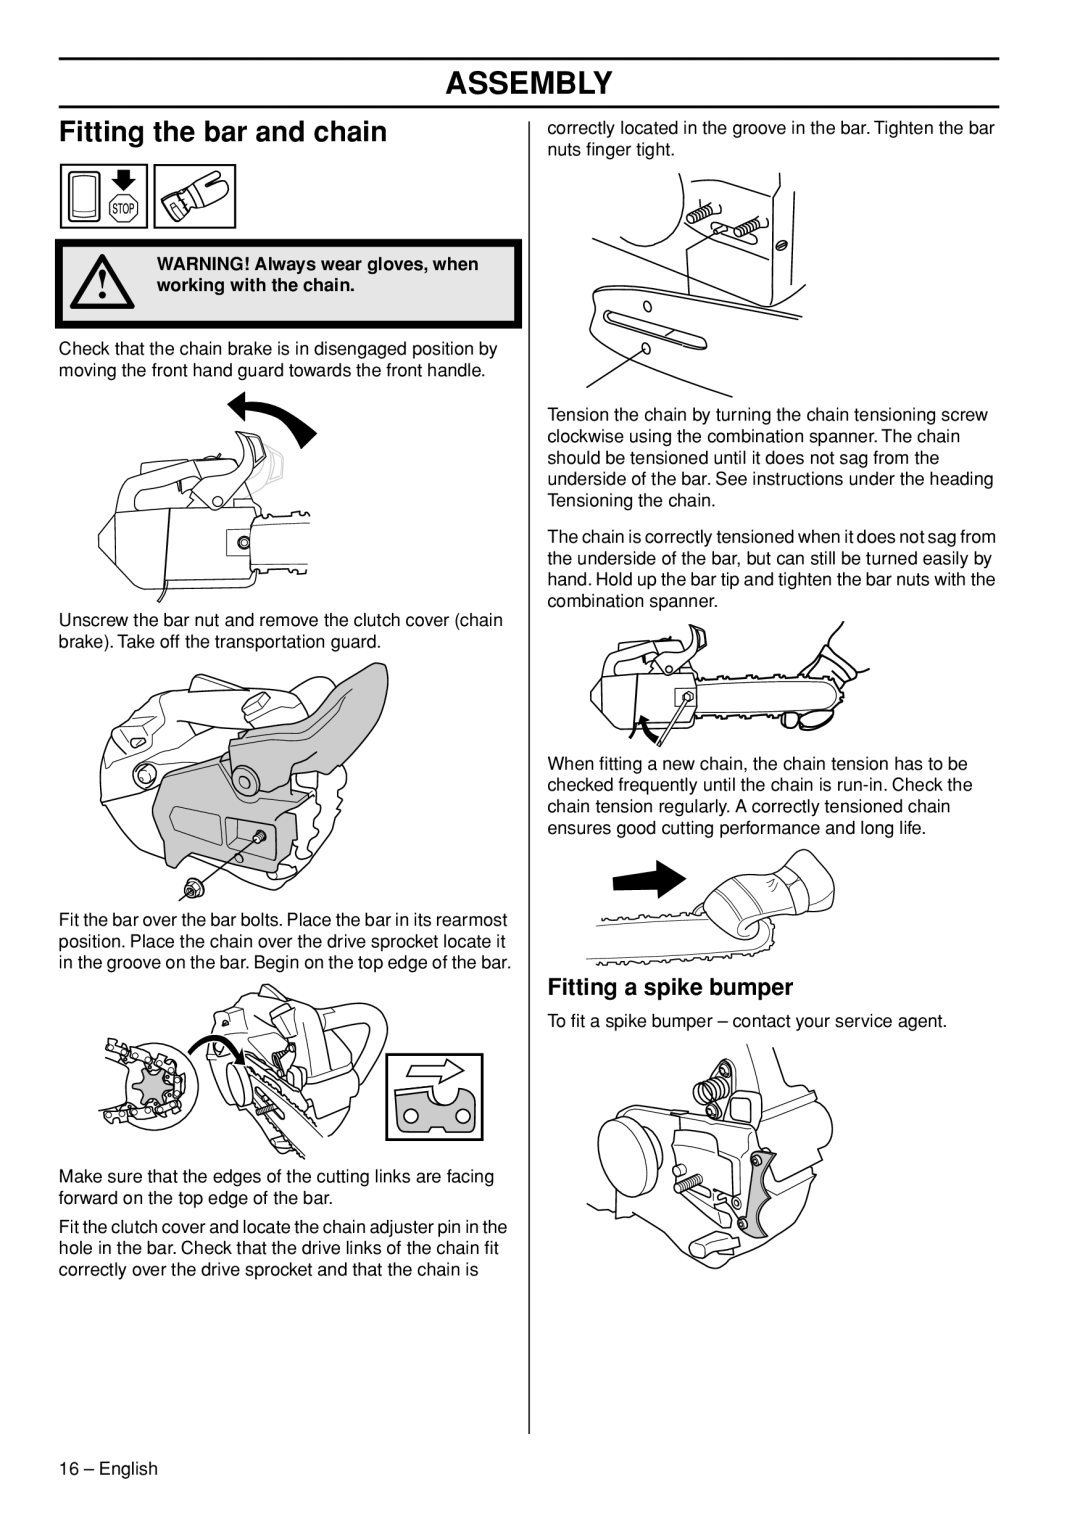 Husqvarna T435 manual Assembly, Fitting the bar and chain, Fitting a spike bumper, WARNING! Always wear gloves, when 